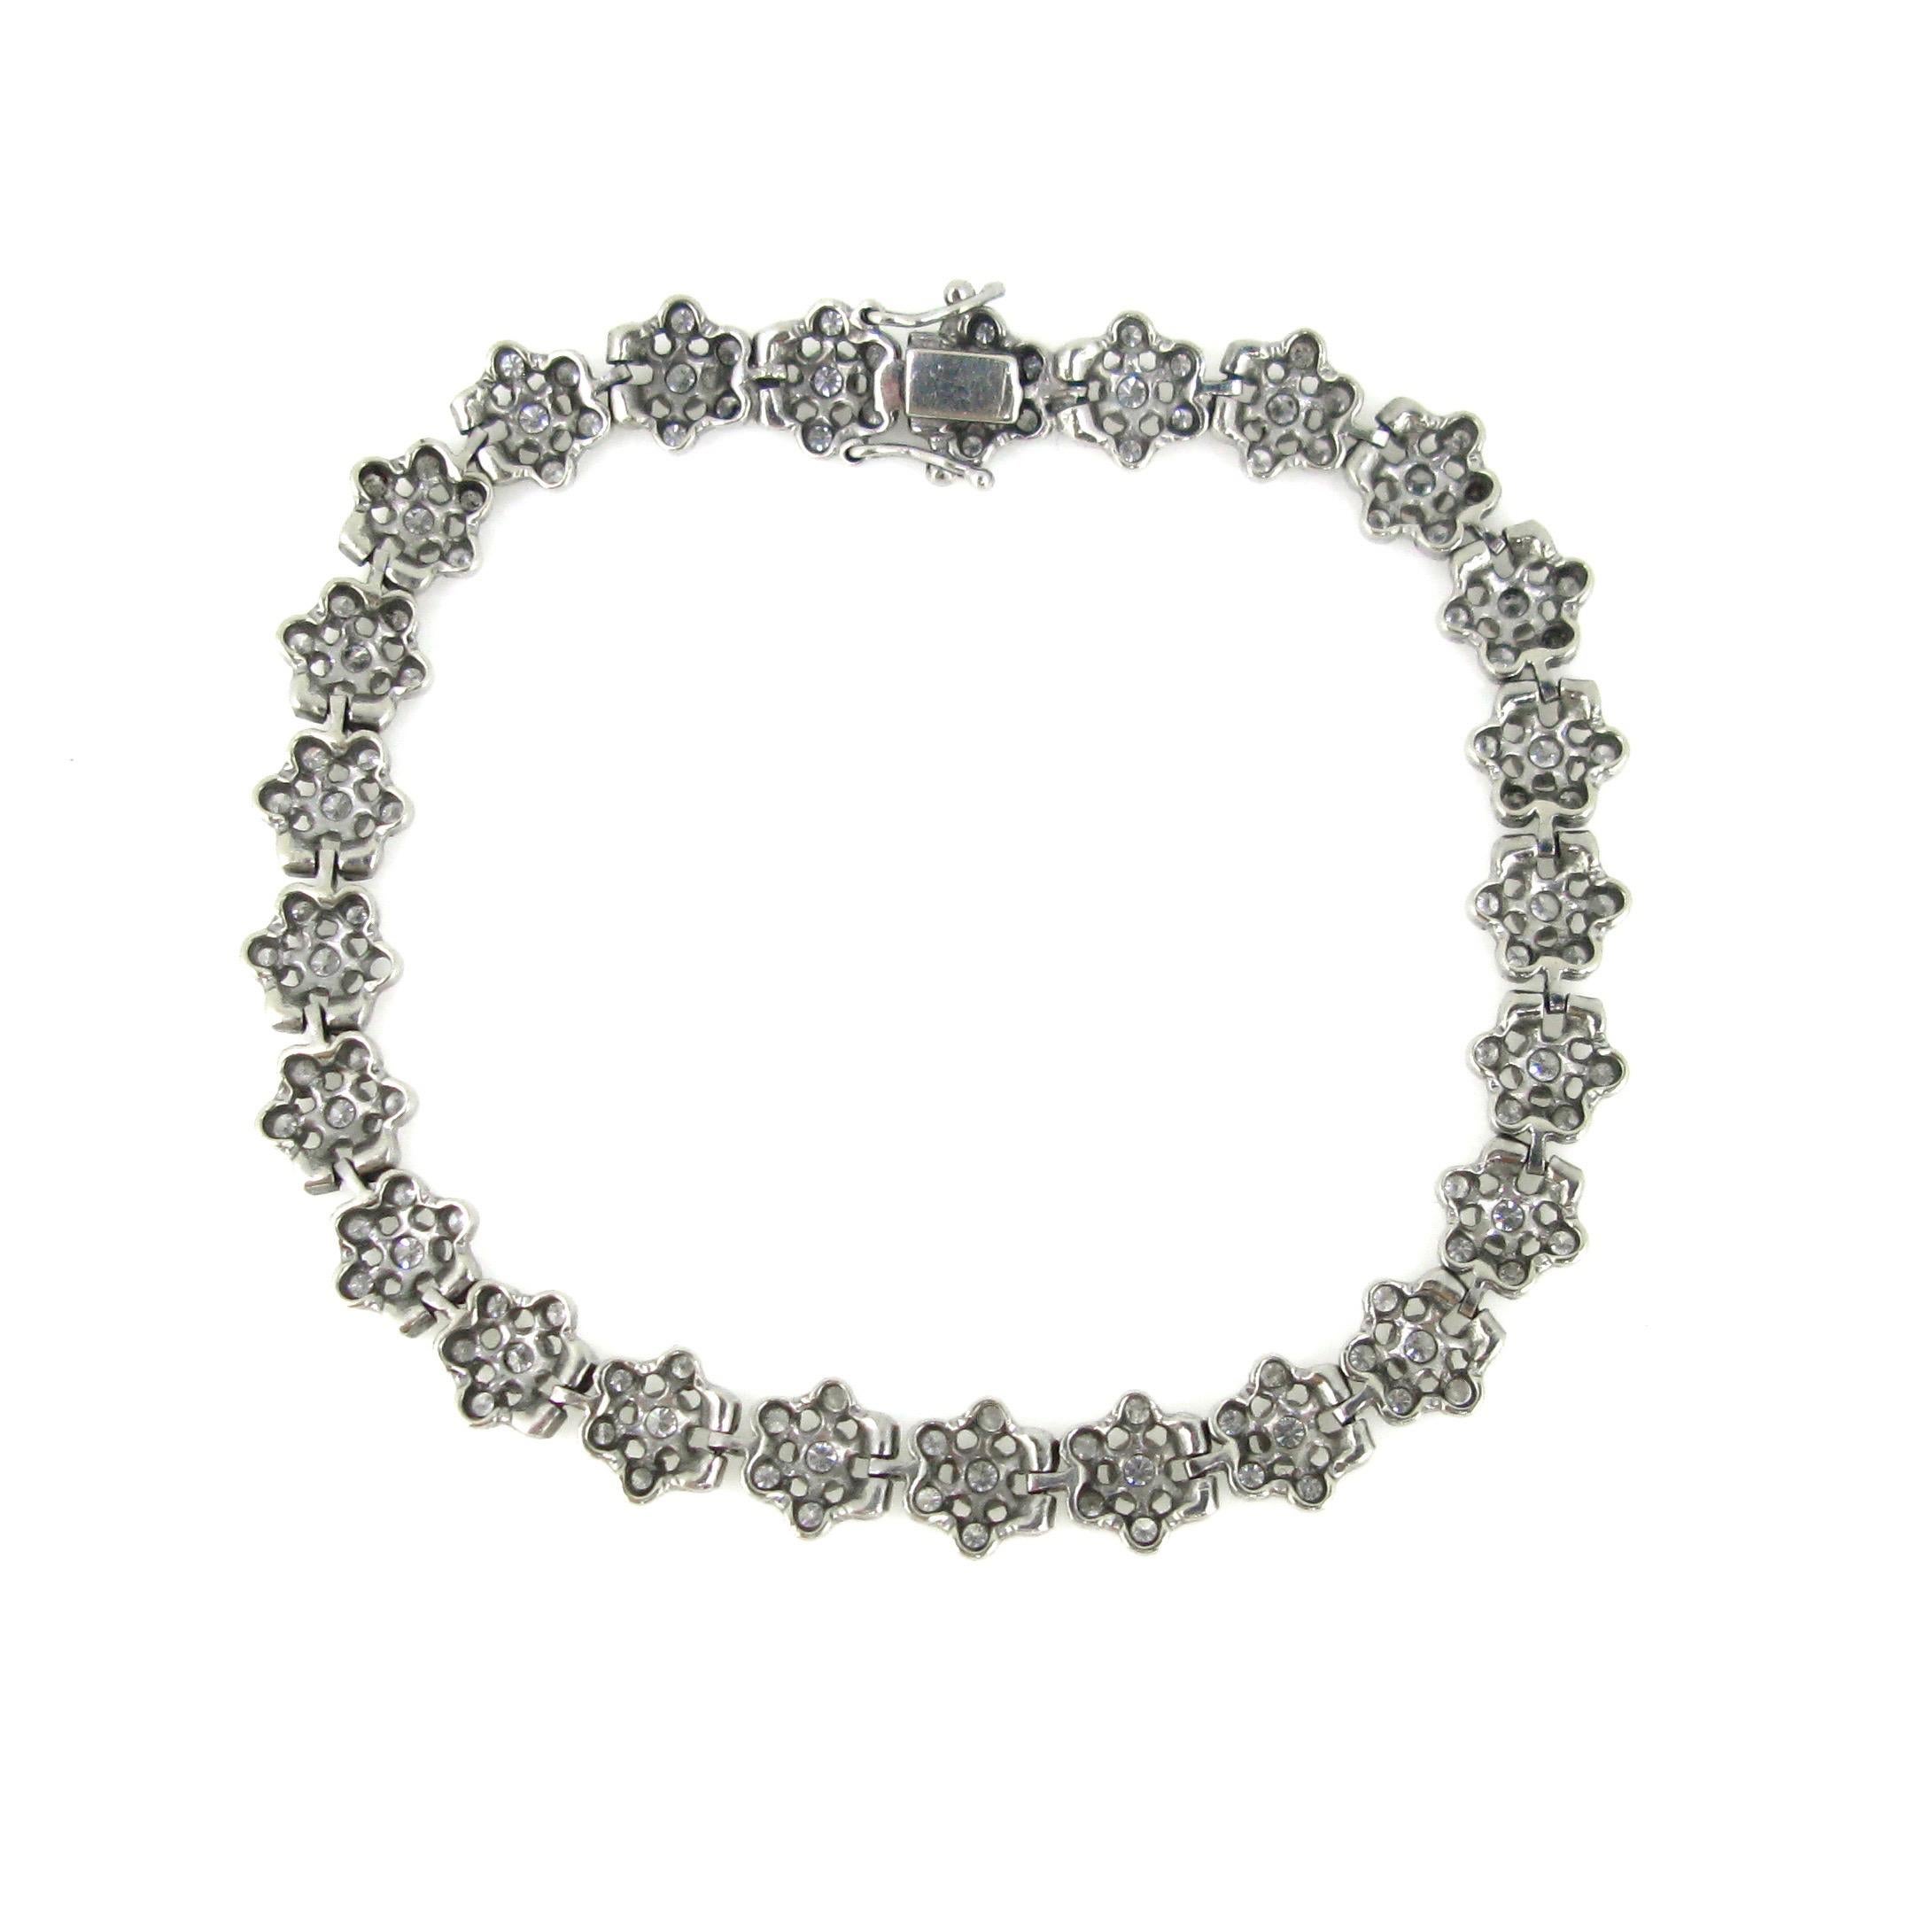 This ravishing flowery bracelet features 25 links, set with brilliant cut diamonds. There is an approximate total carat weight of 2ct. The clasp is secured with 2 security clasps. It is controlled with the French hallmark, the eagle’s head for 18kt